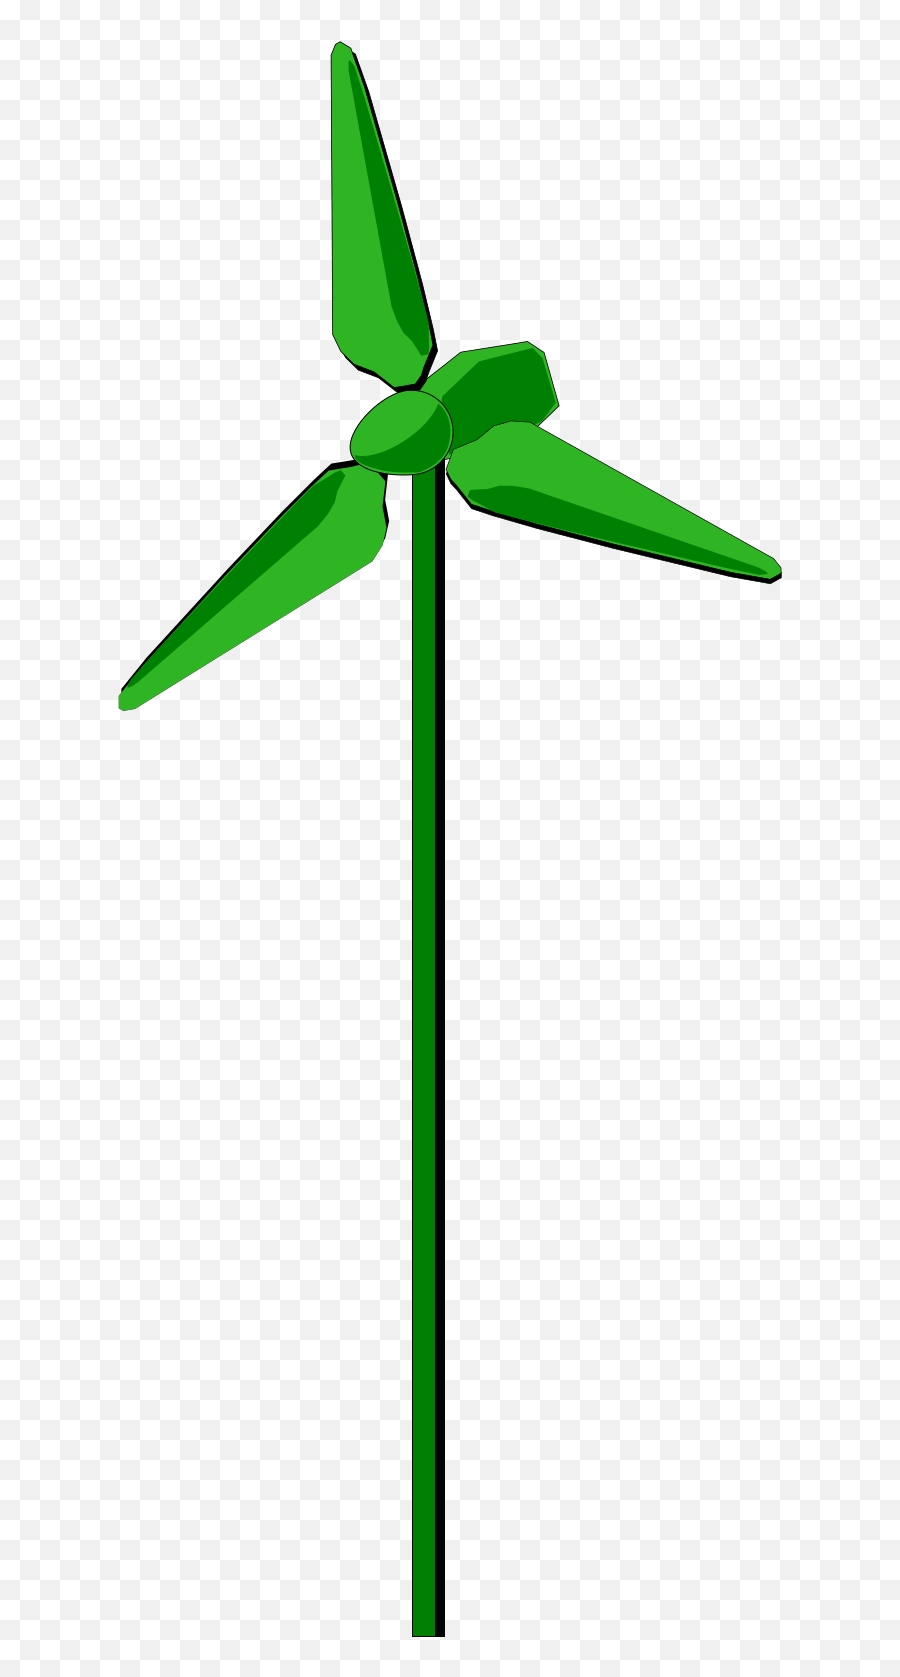 Energy Positive Wind Turbine Green Png Svg Clip Art For Web - Wind Turbine Clip Art,Windmill Png